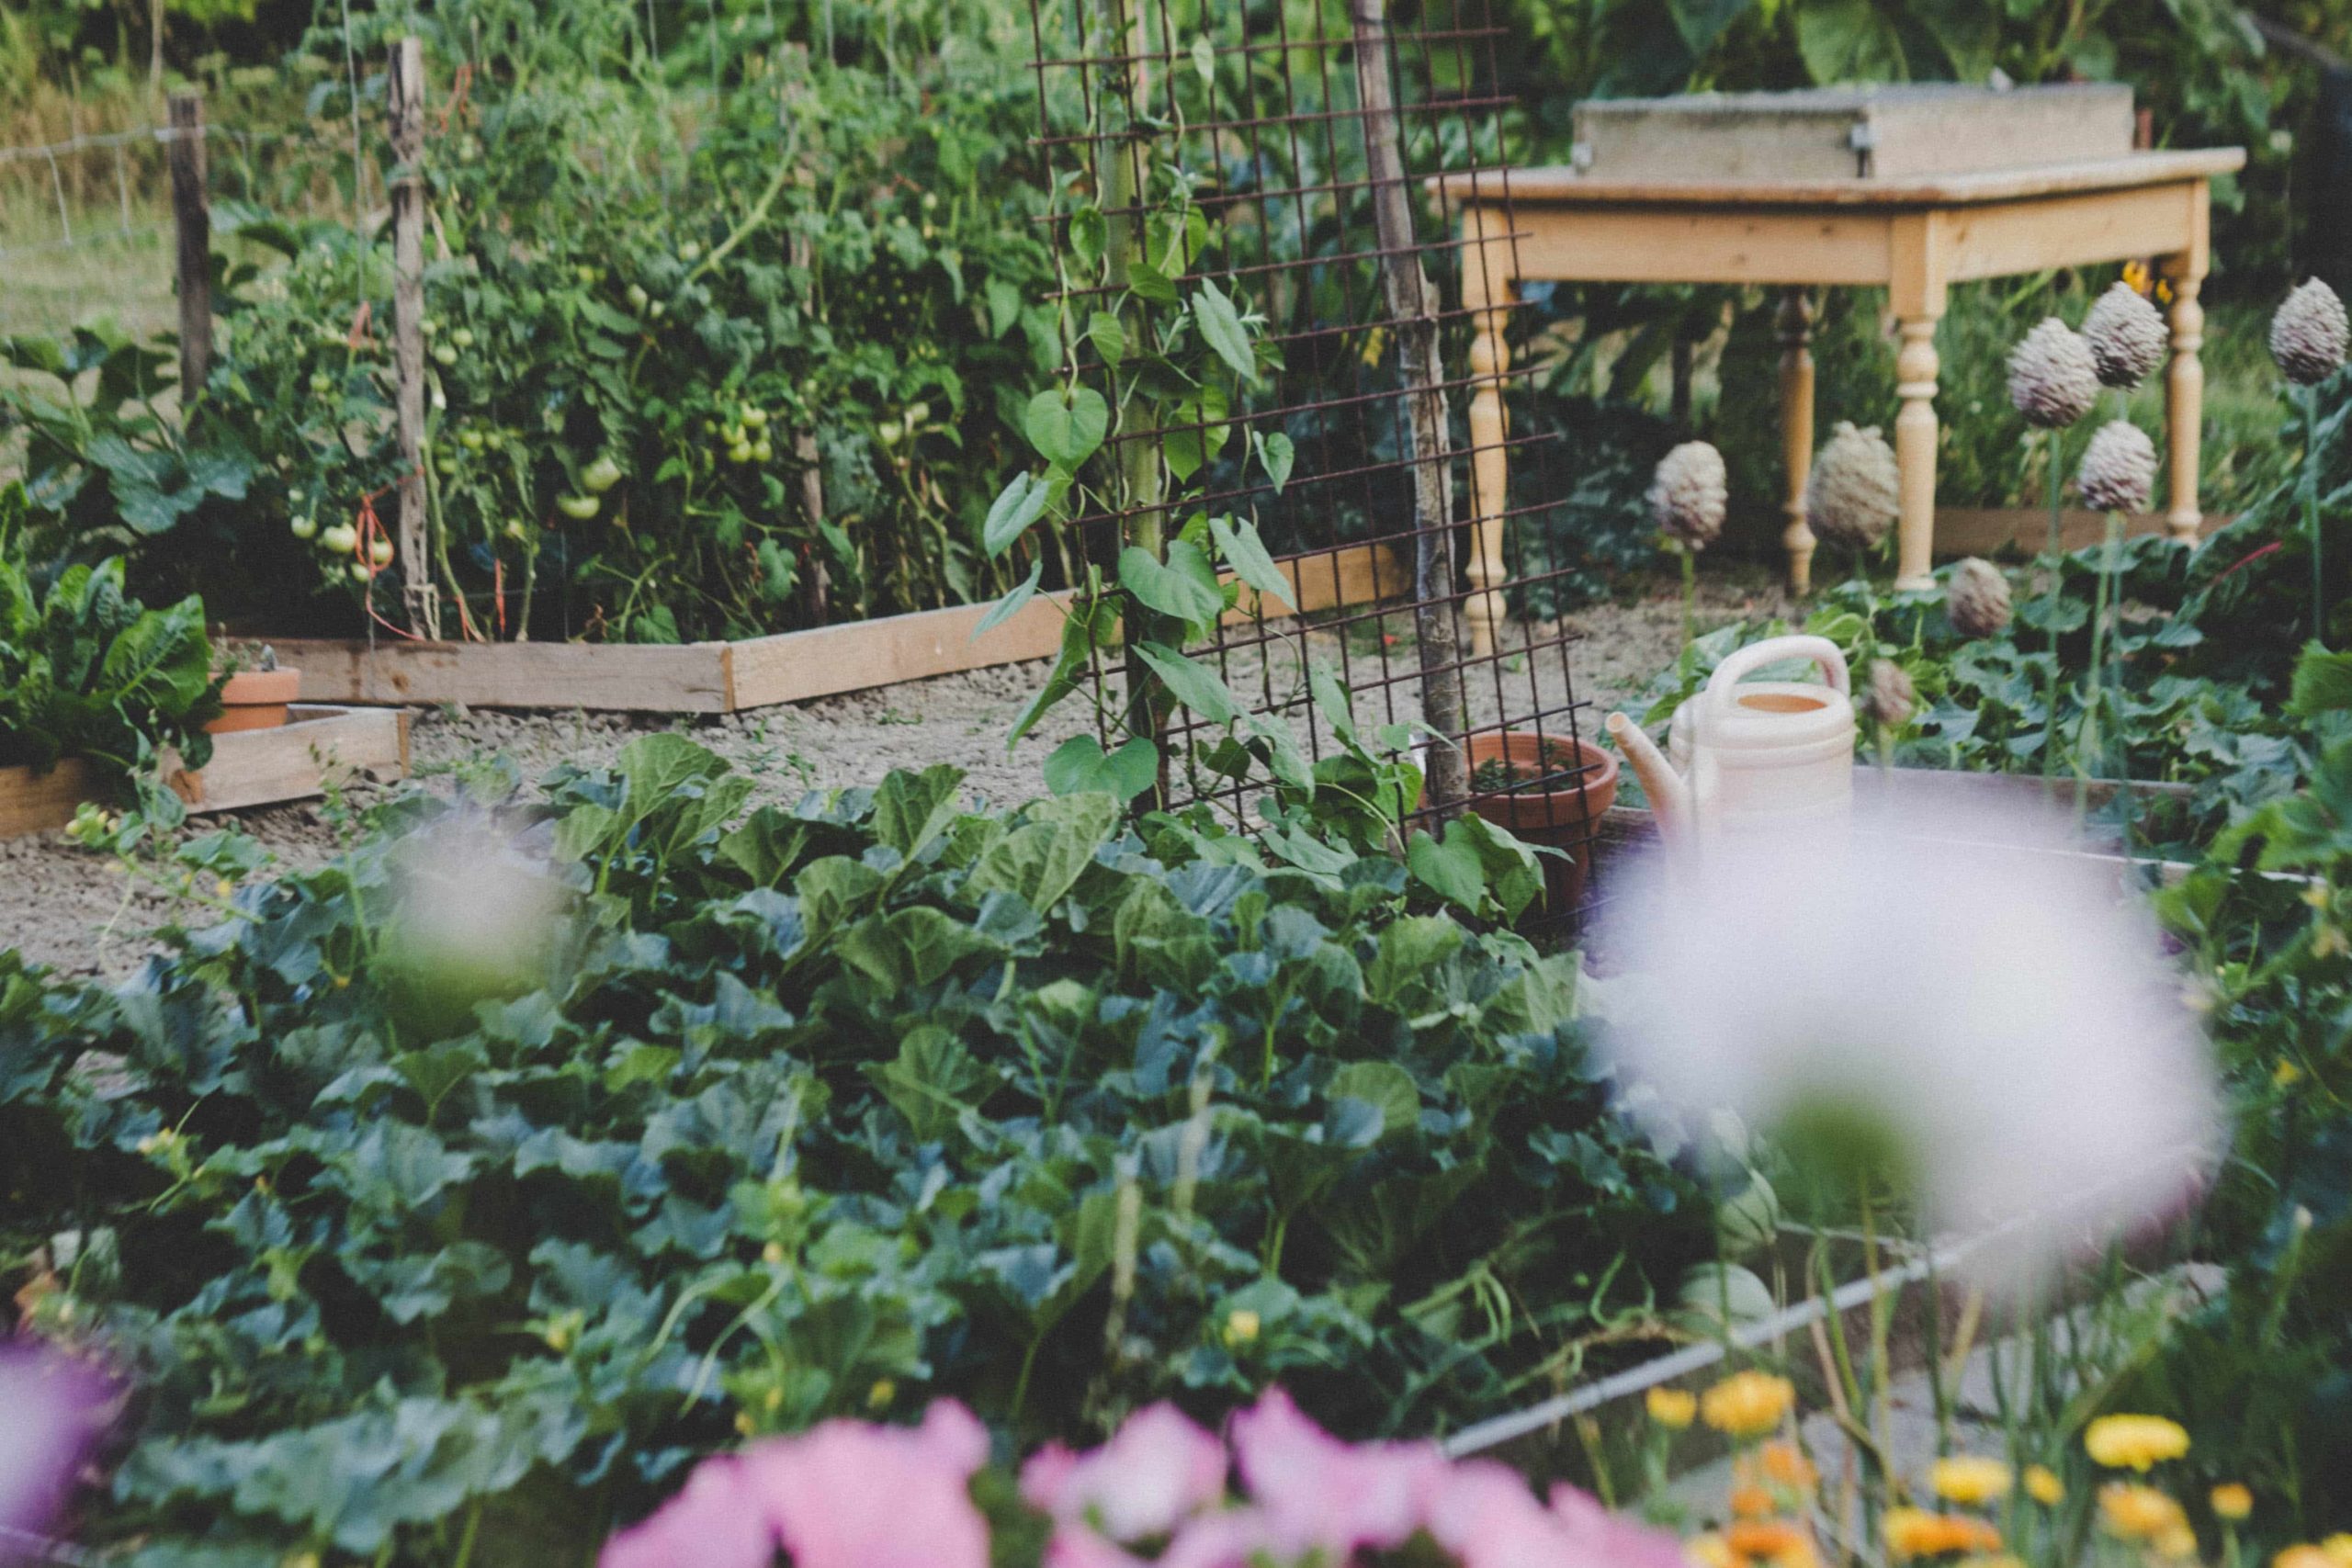 plan a vegetable garden that looks great